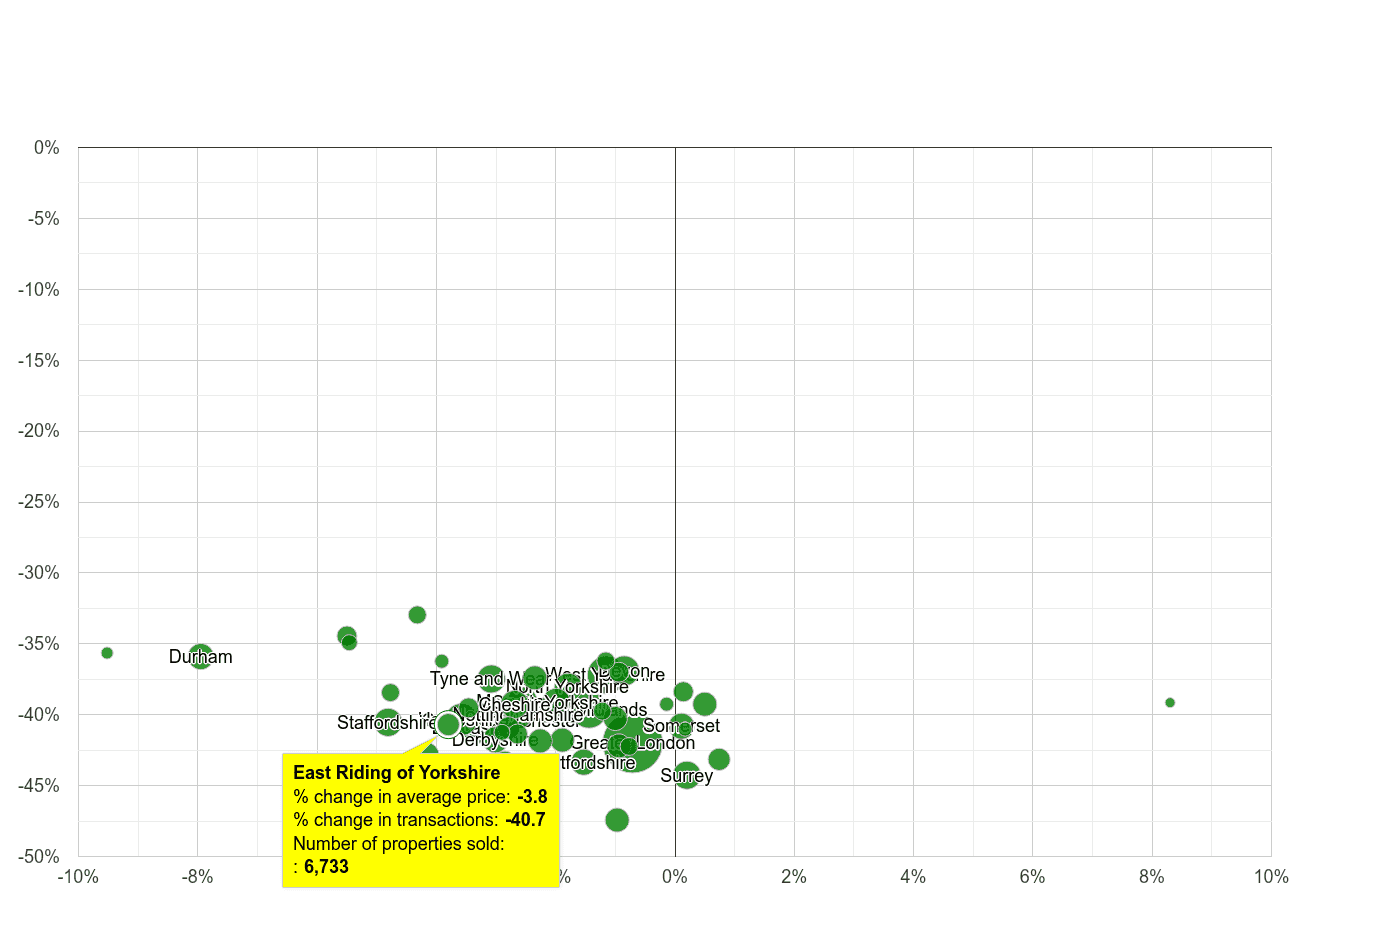 East Riding of Yorkshire property price and sales volume change relative to other counties